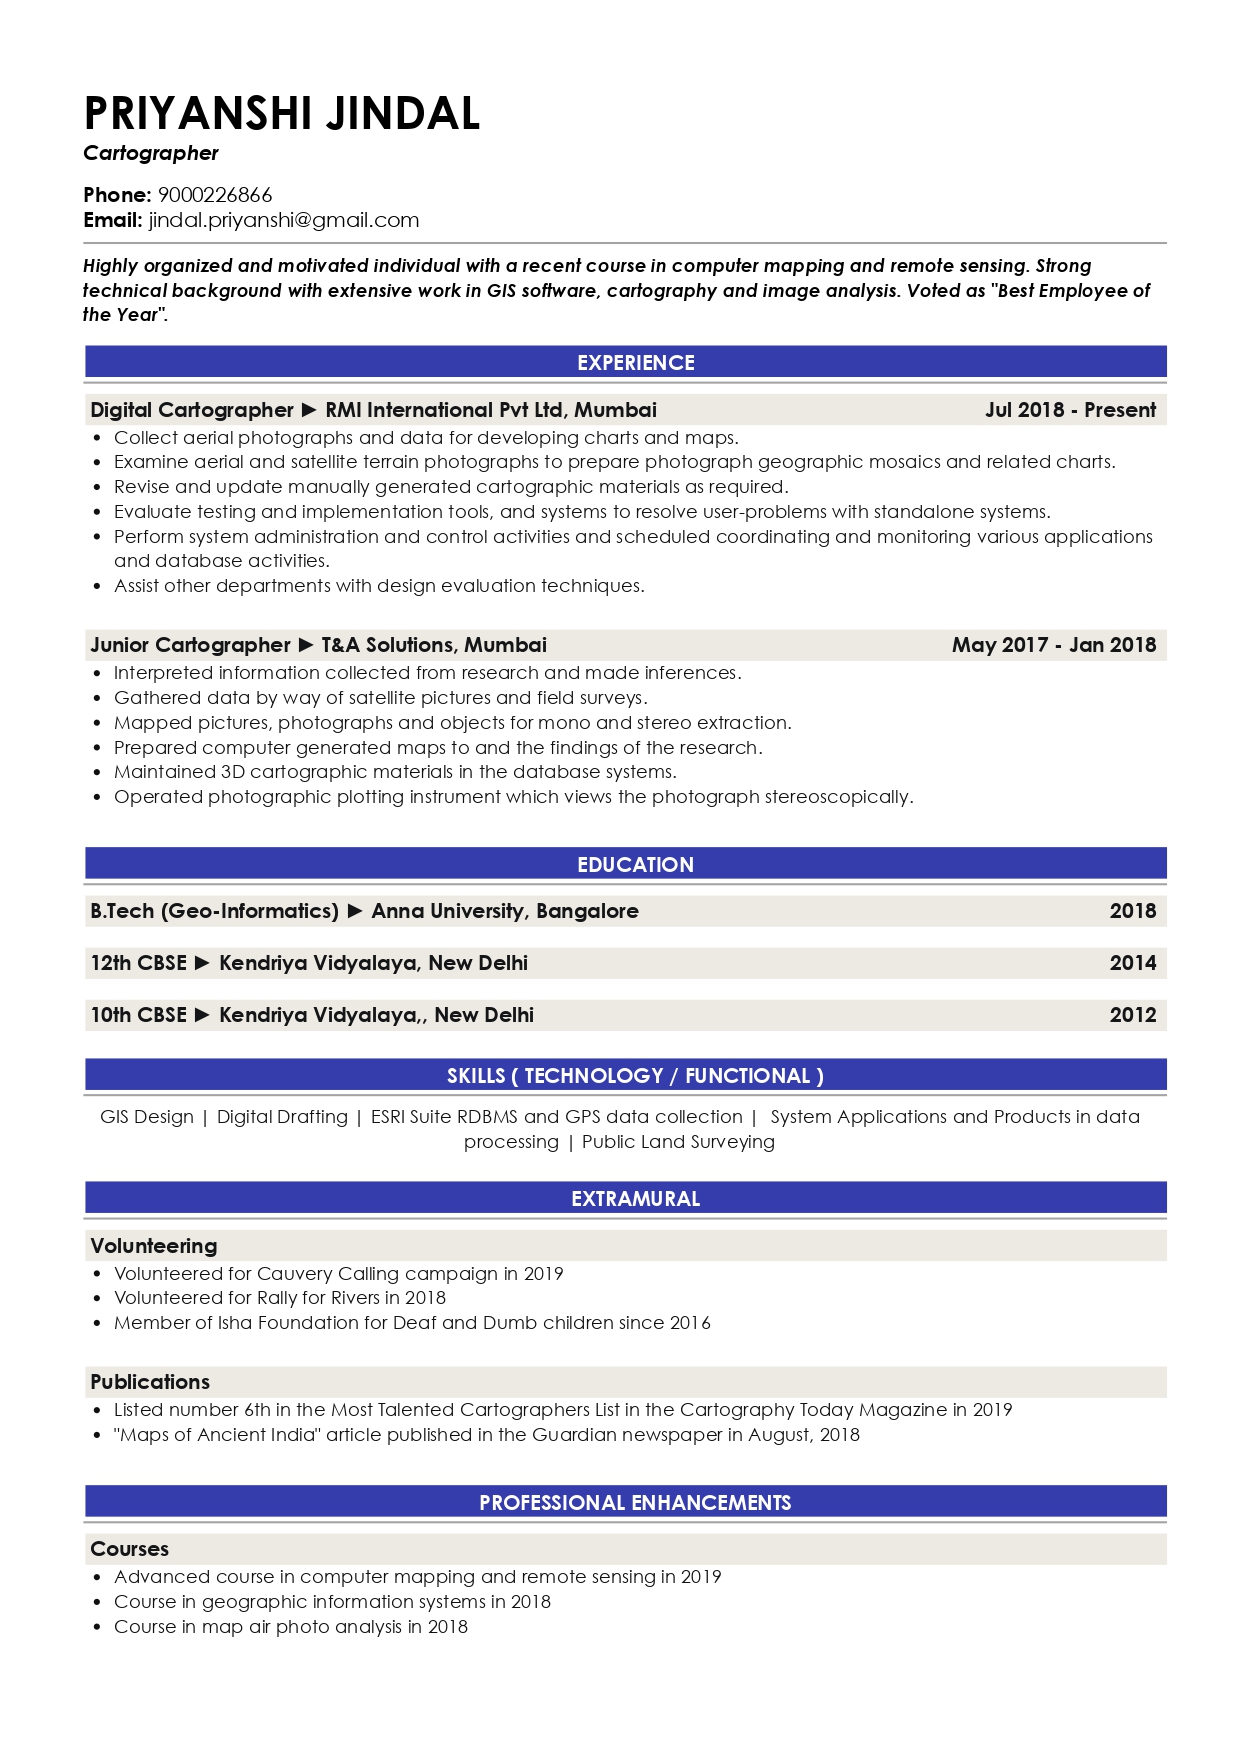 Sample Resume of Cartographer | Free Resume Templates & Samples on Resumod.co